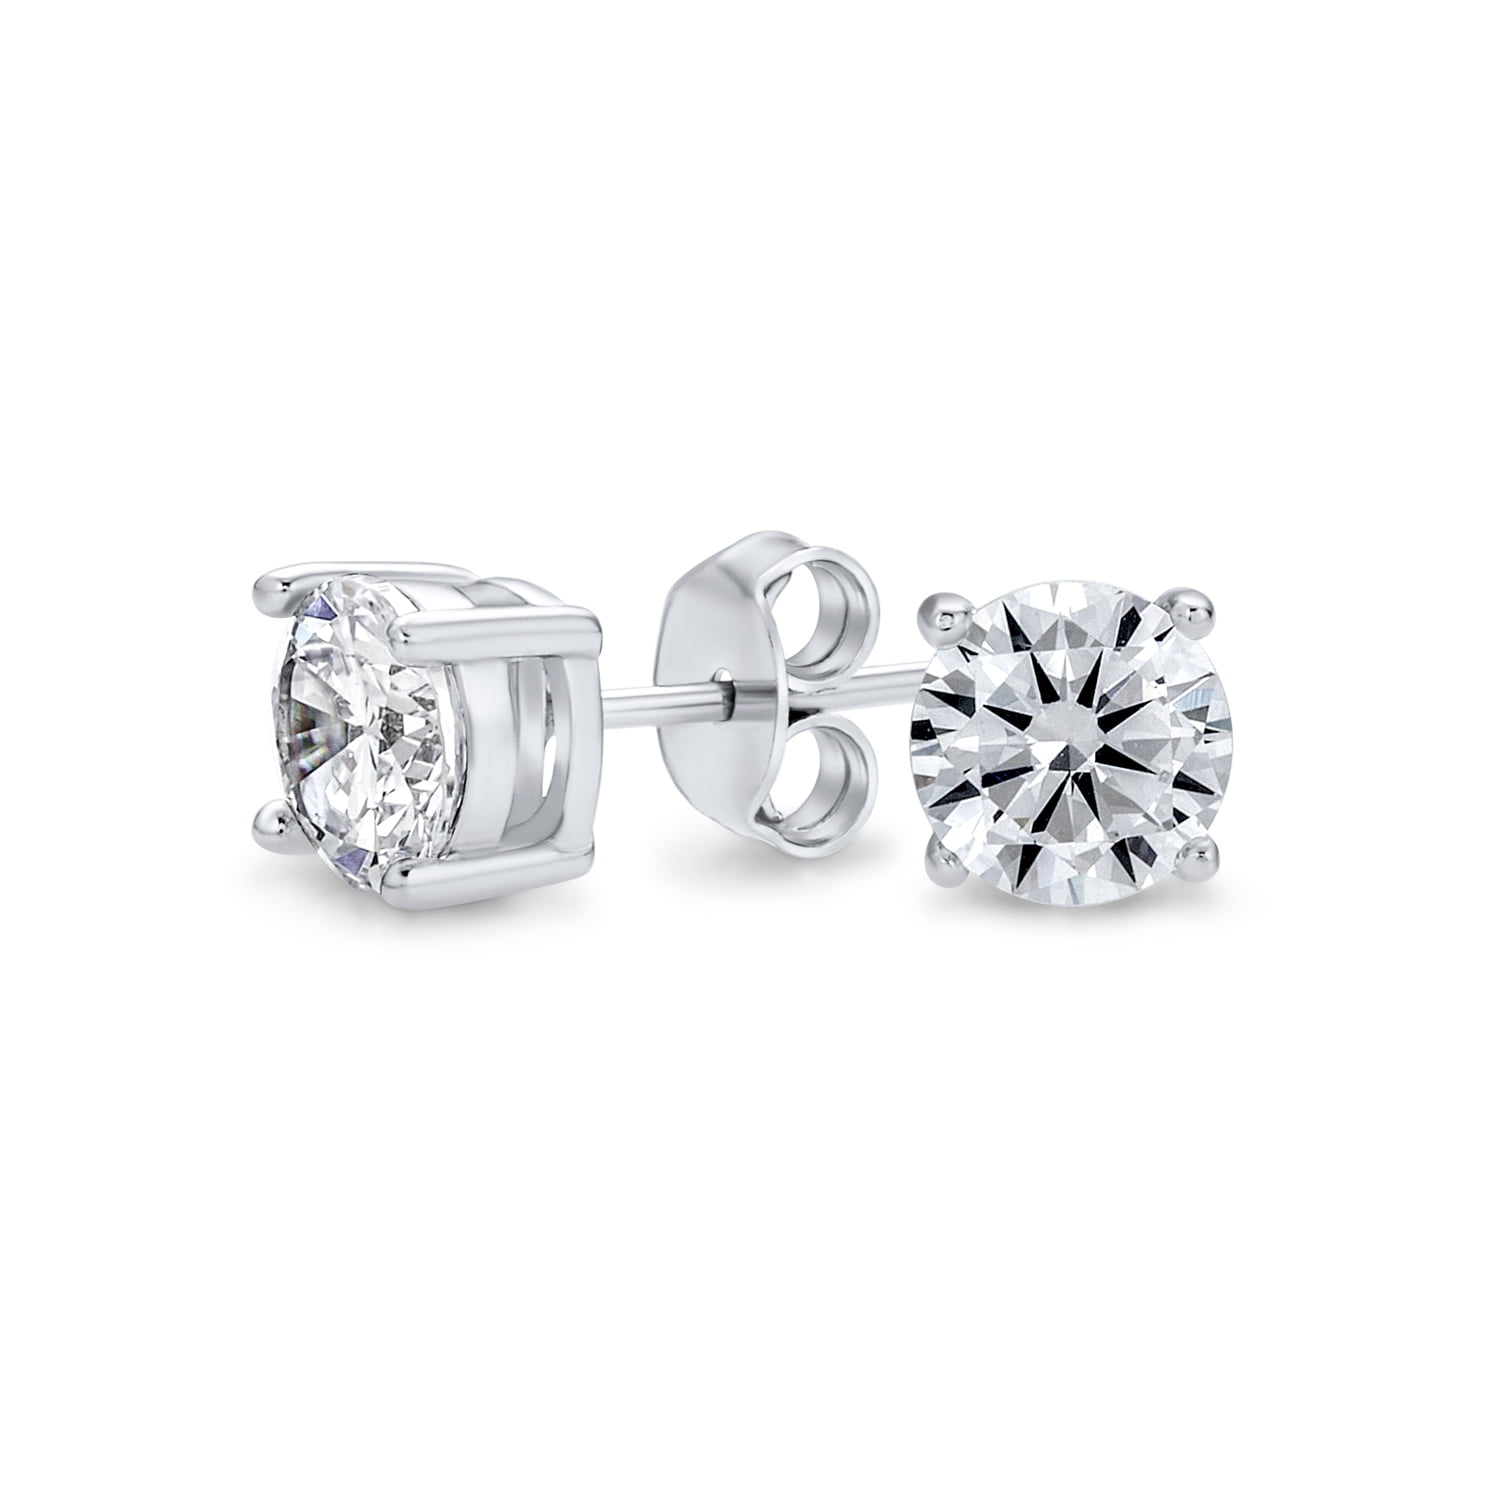 10MM Solitaire Stud Earrings 14K White Gold Over .925 Sterling Silver For Womens Round Cut Created Gemstones